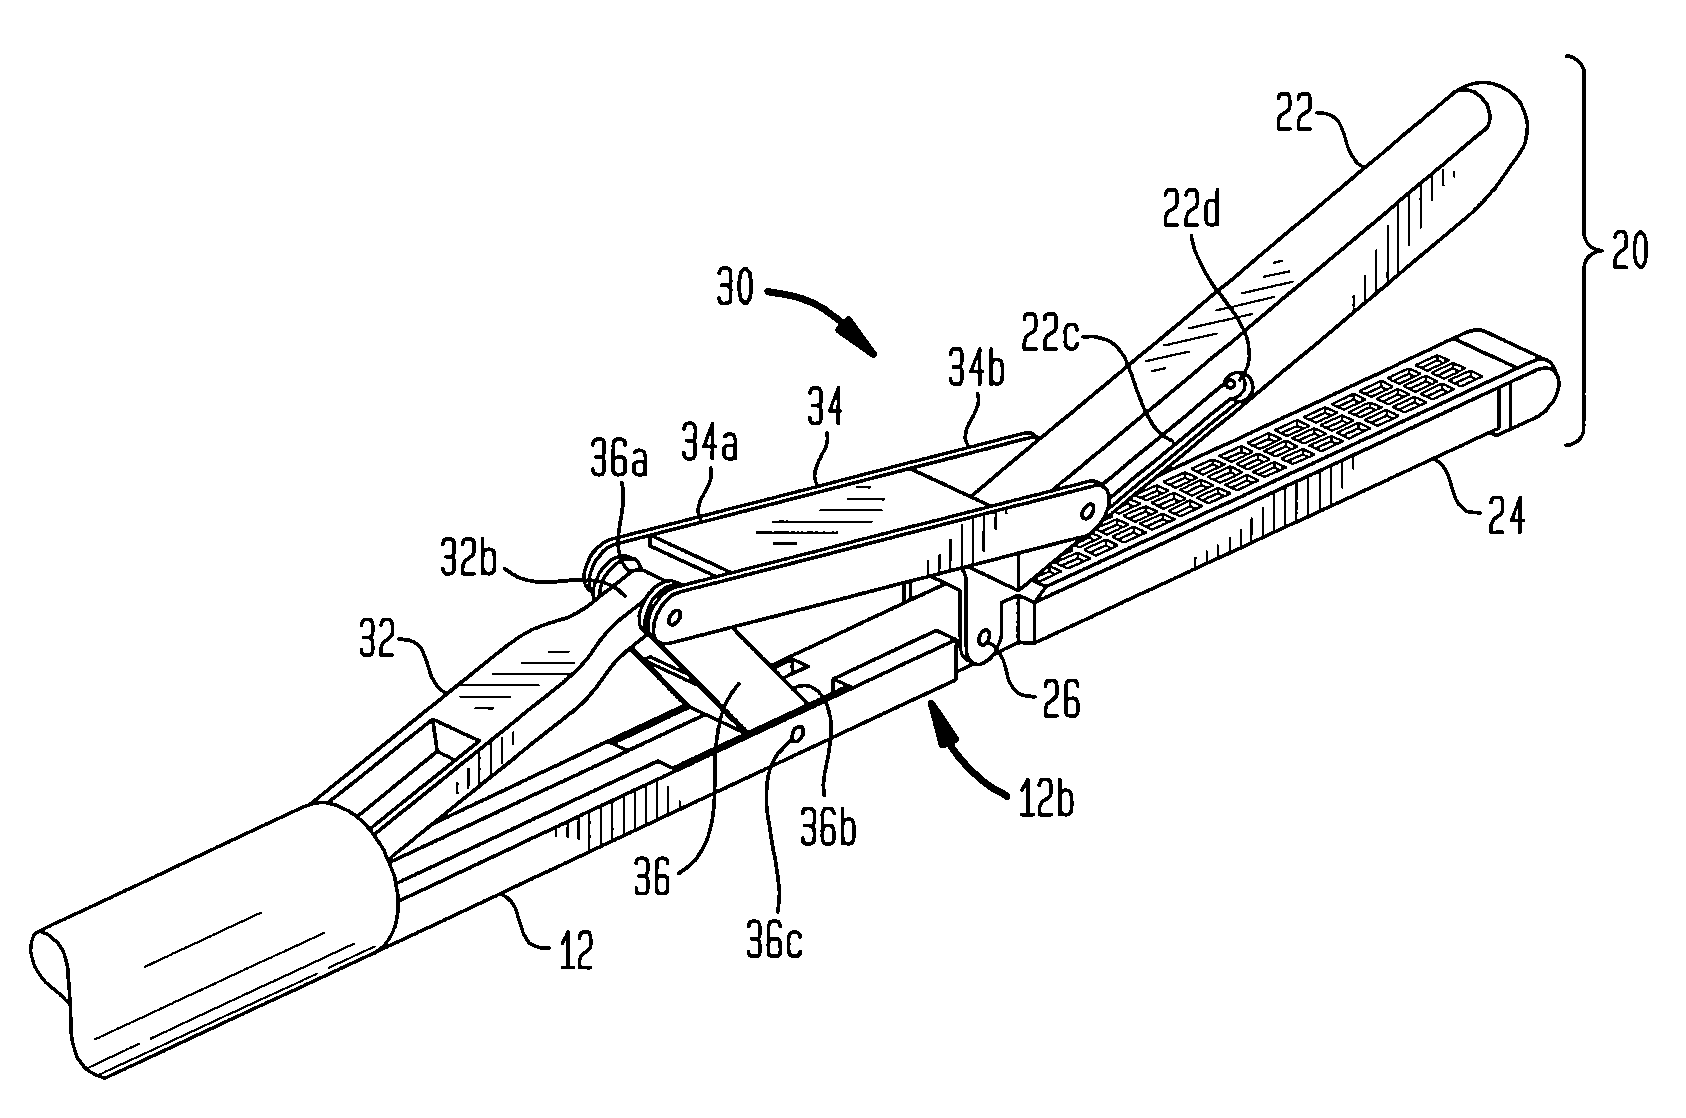 Surgical stapler with an end effector support